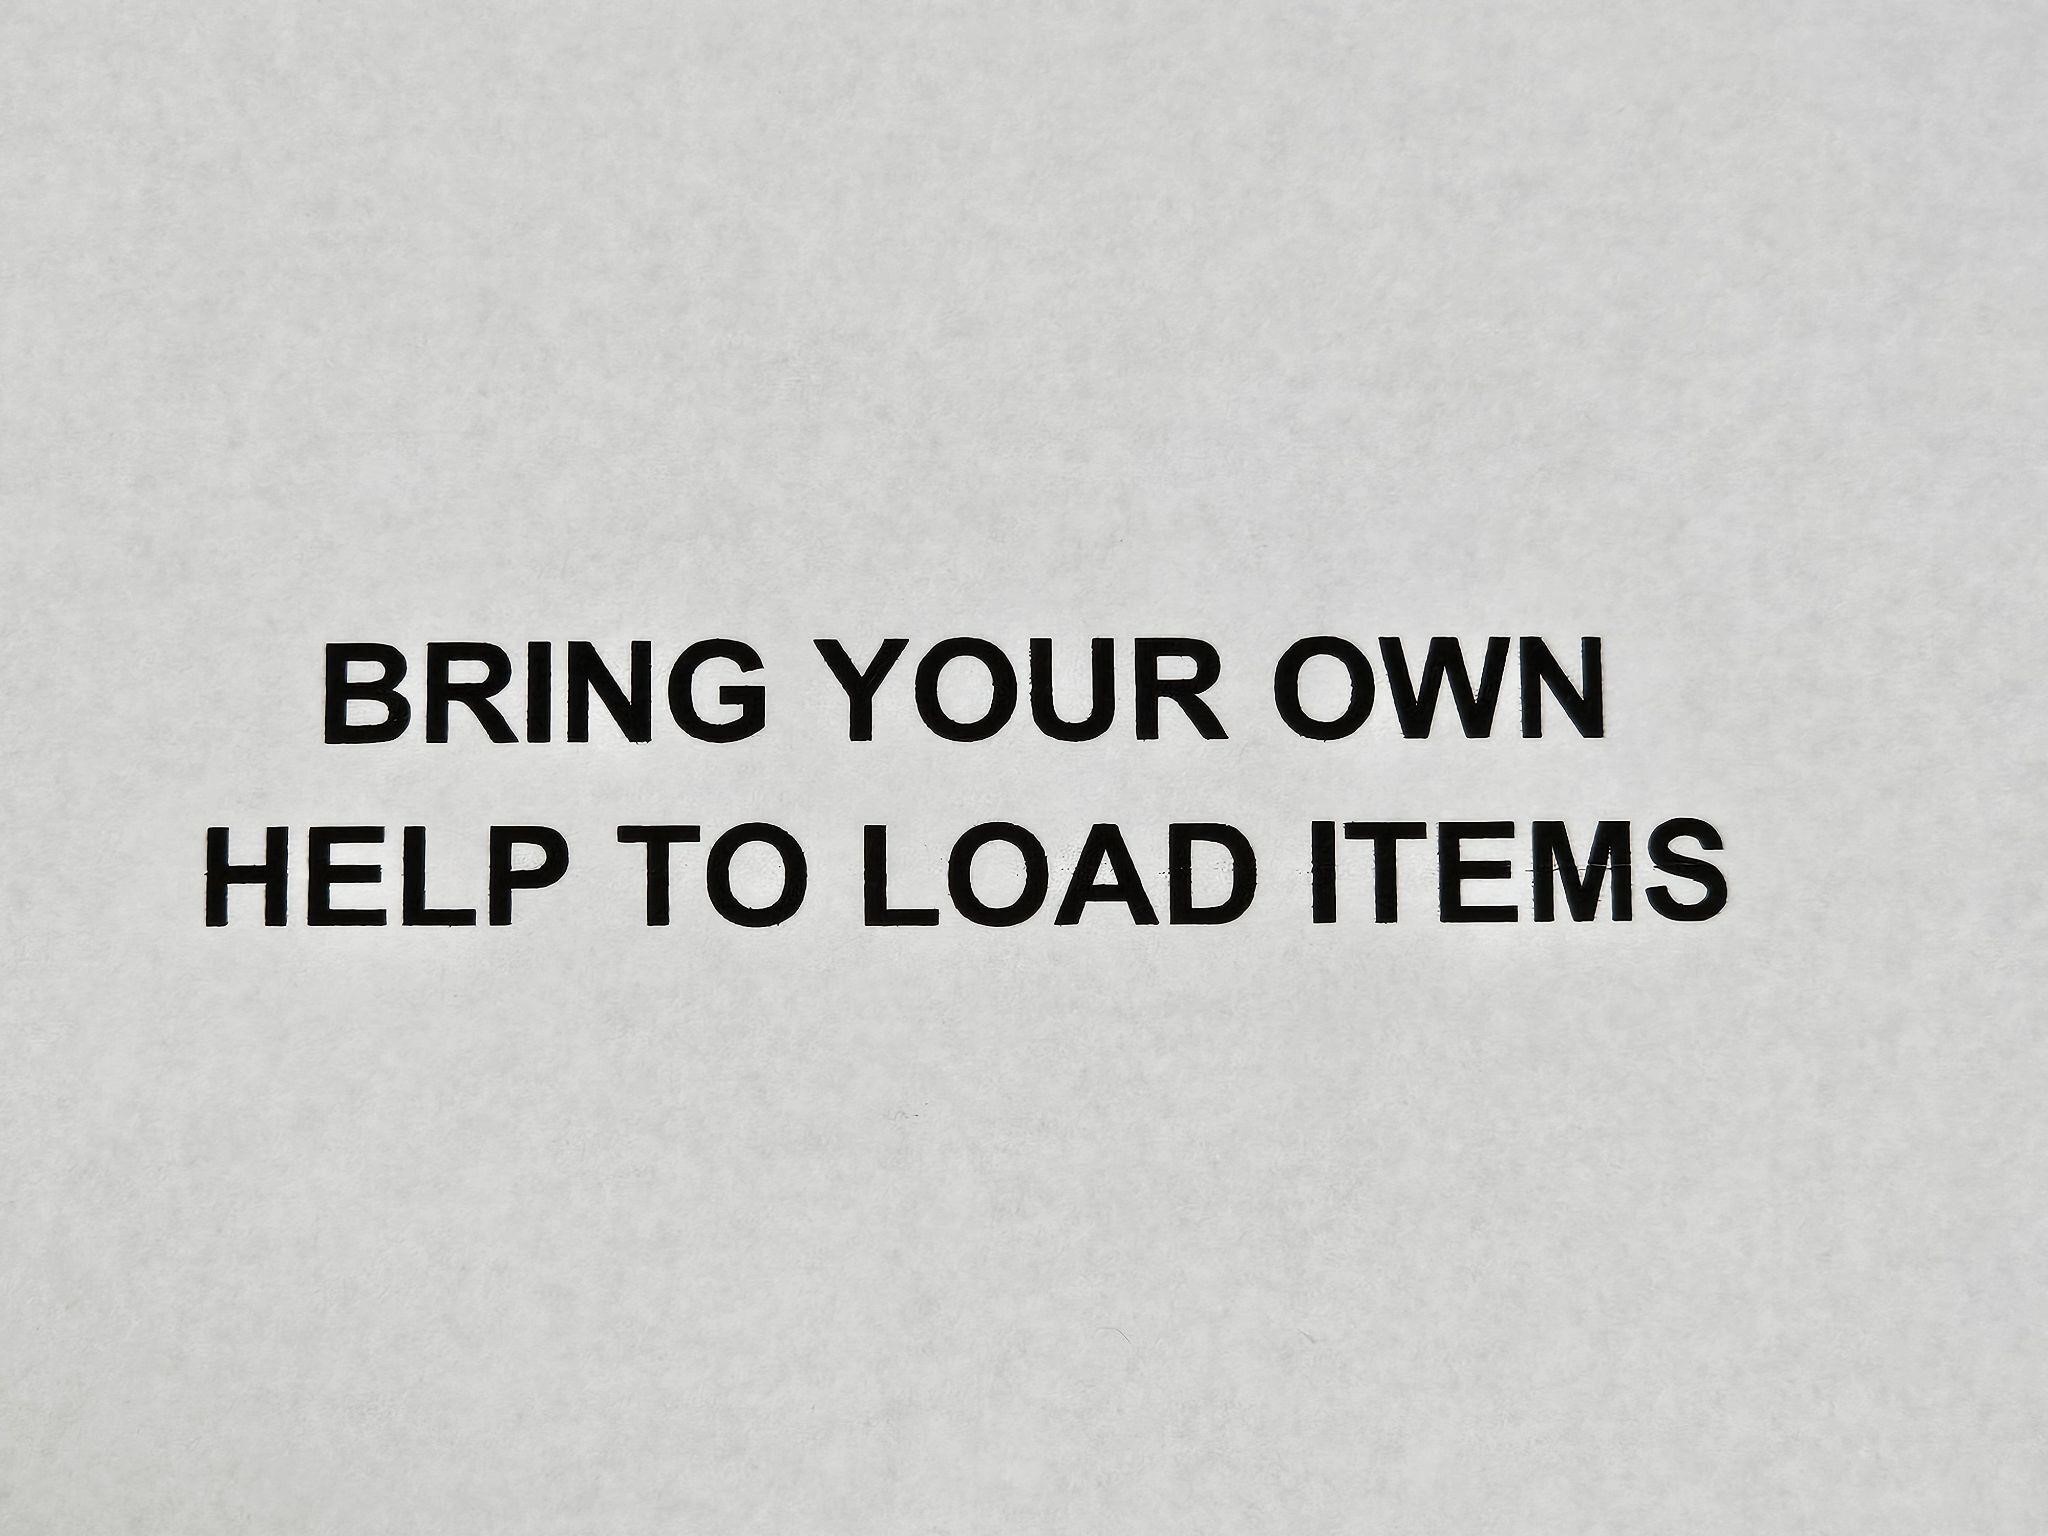 Bring Help to Load Items